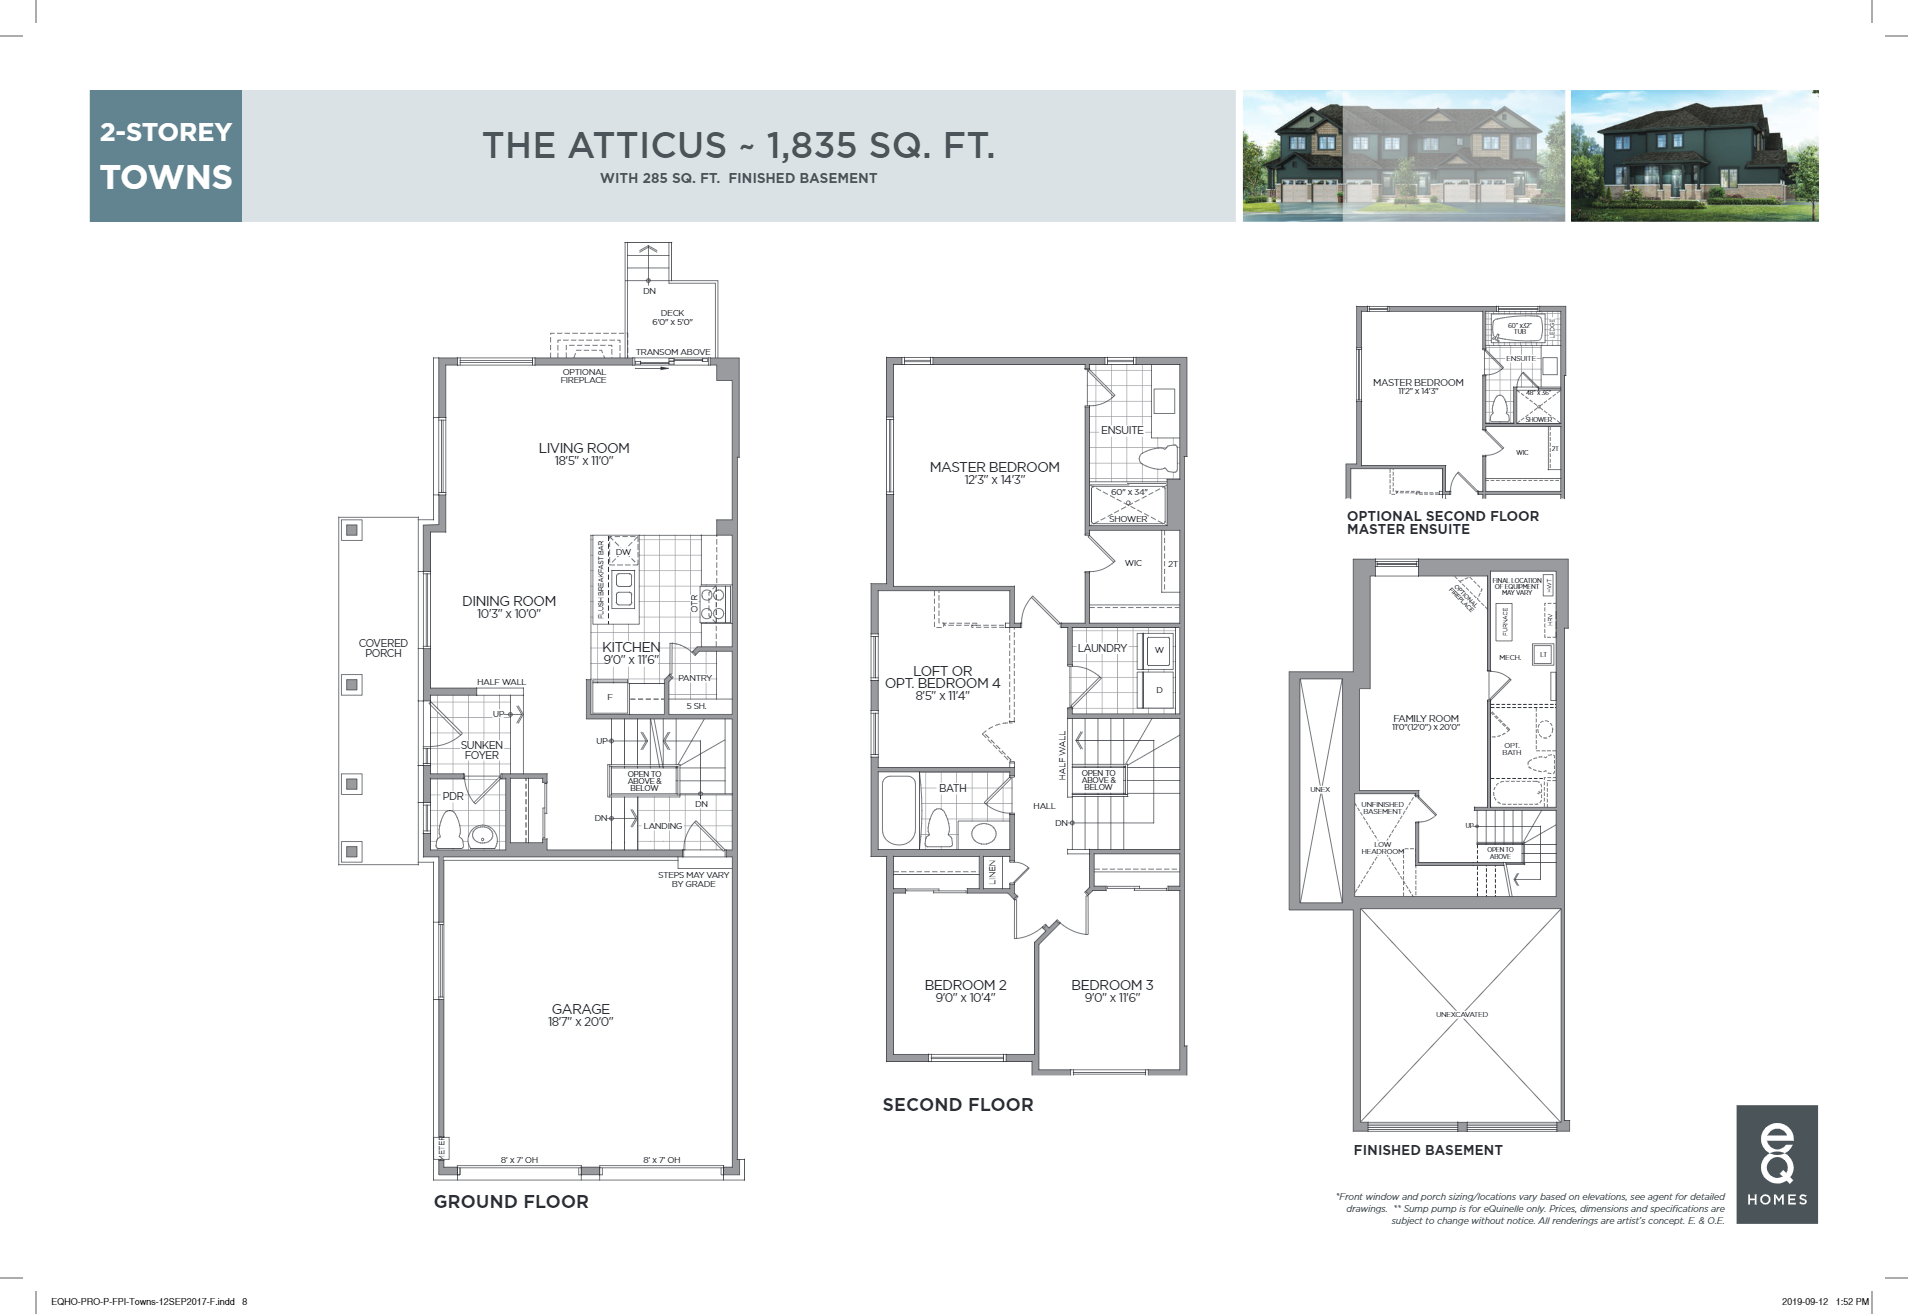 The Atticus Floor Plan of Provence, Orleans Town with undefined beds